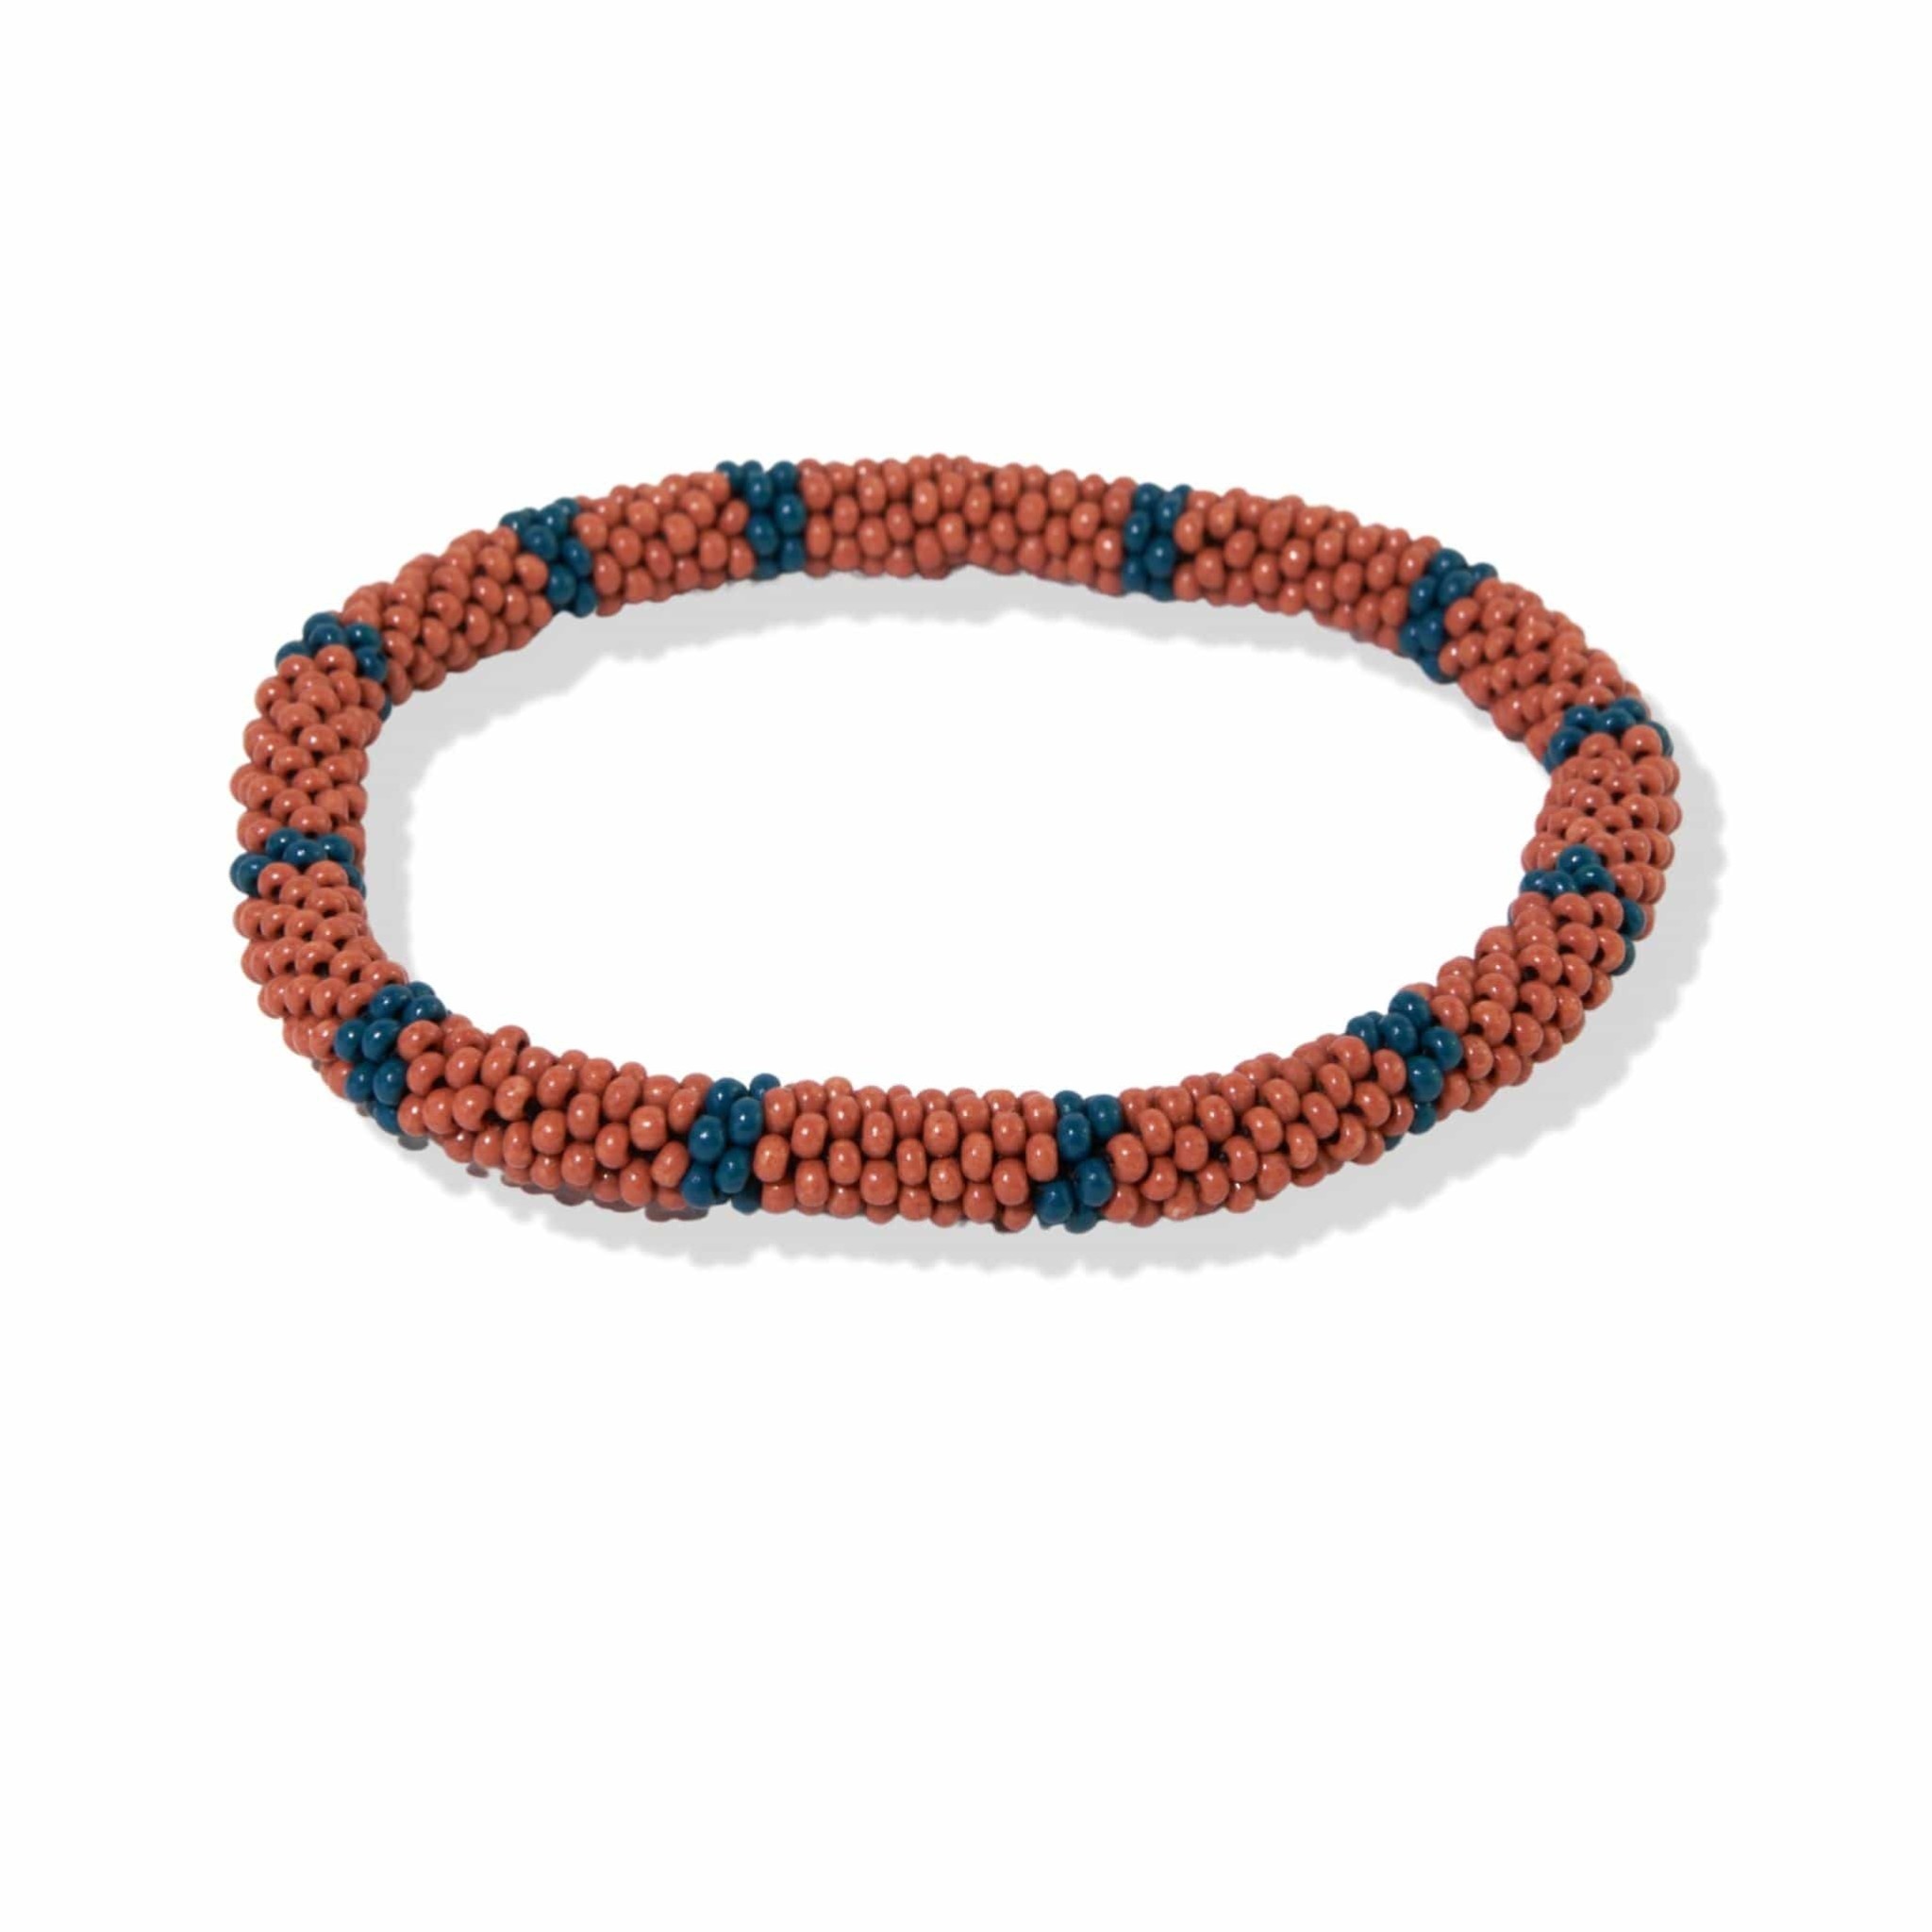 Colorblock Beaded Stretch Bracelet - Black and White